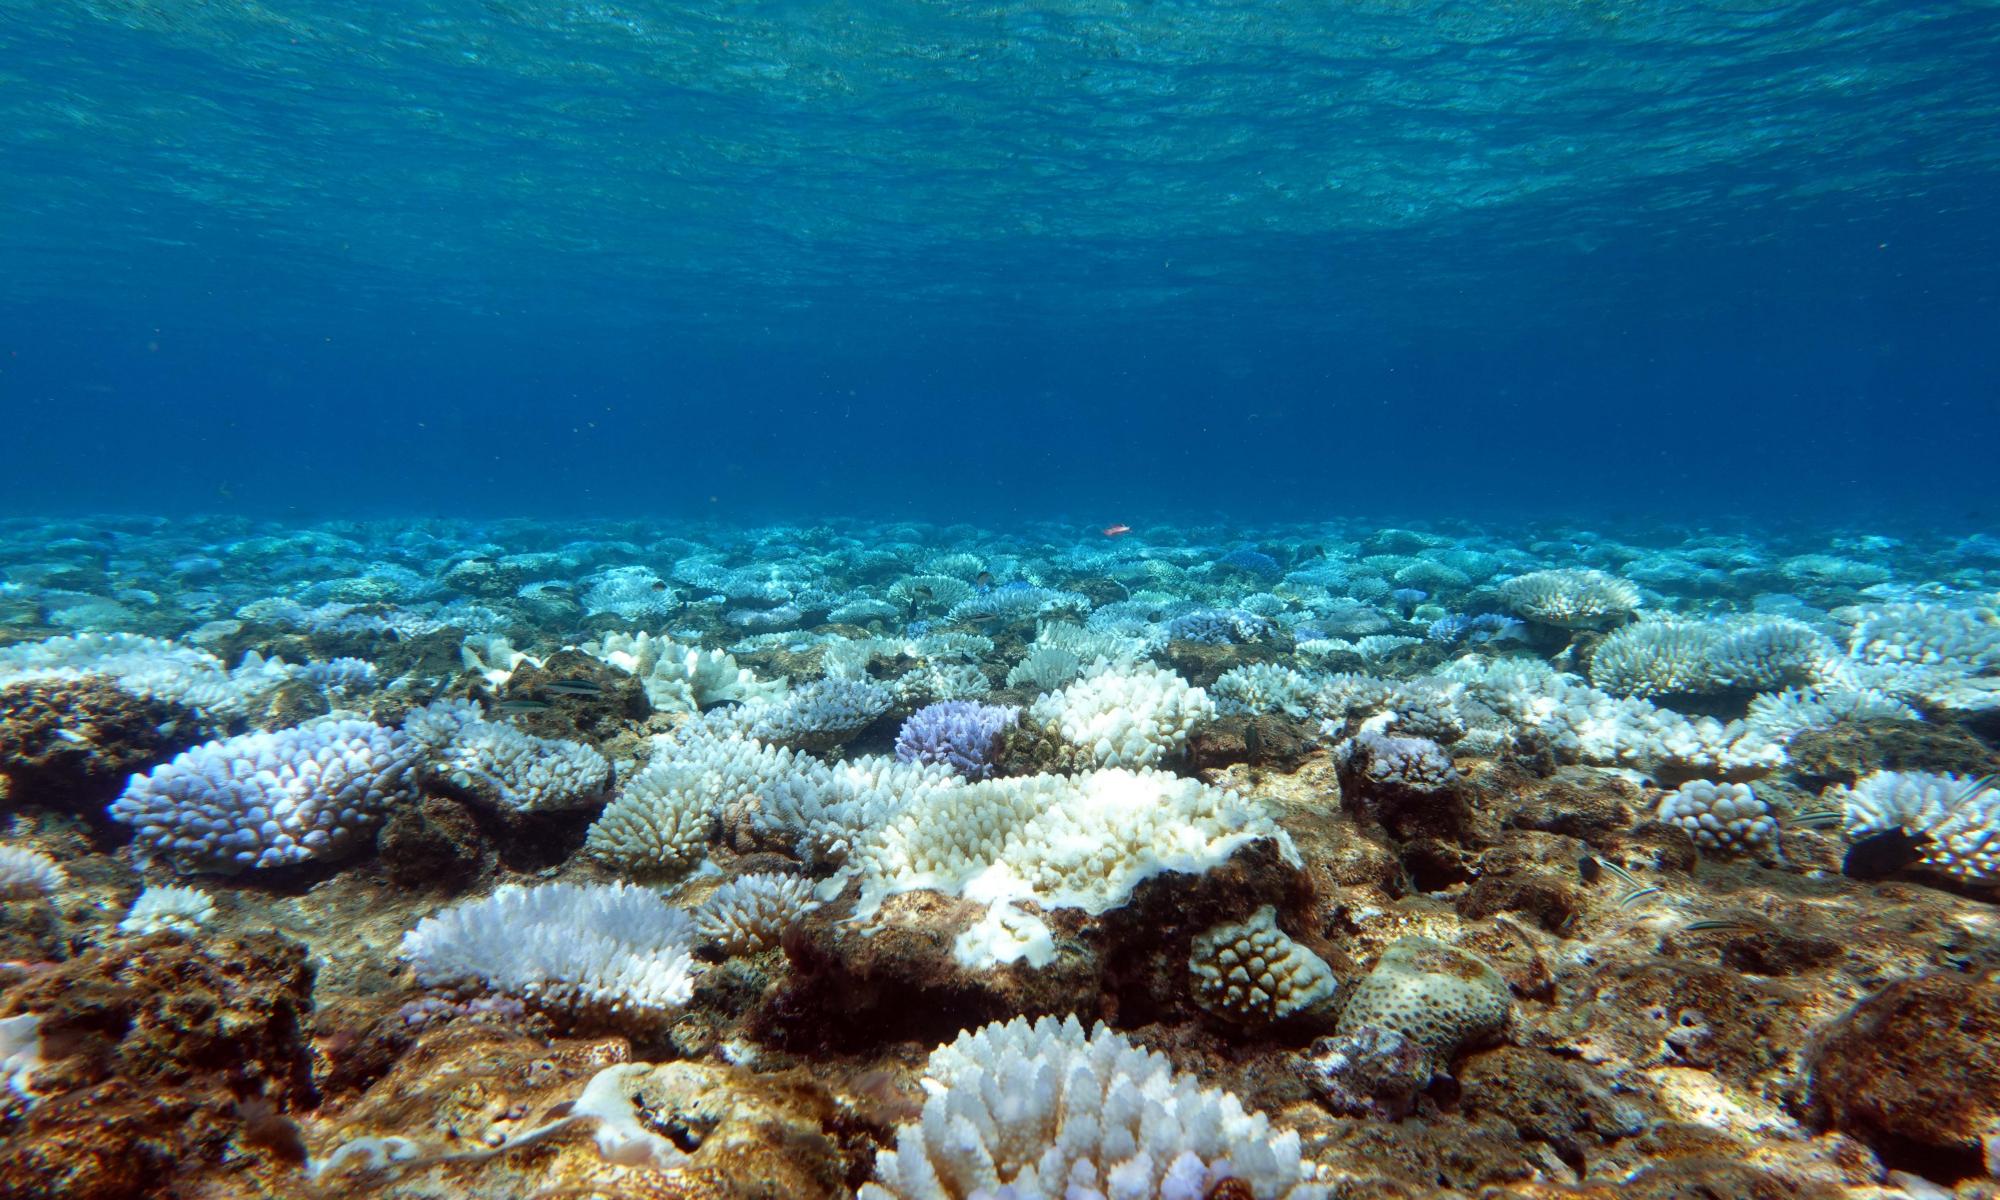 More than half of remote reefs in Coral Sea marine park suffered extreme bleaching